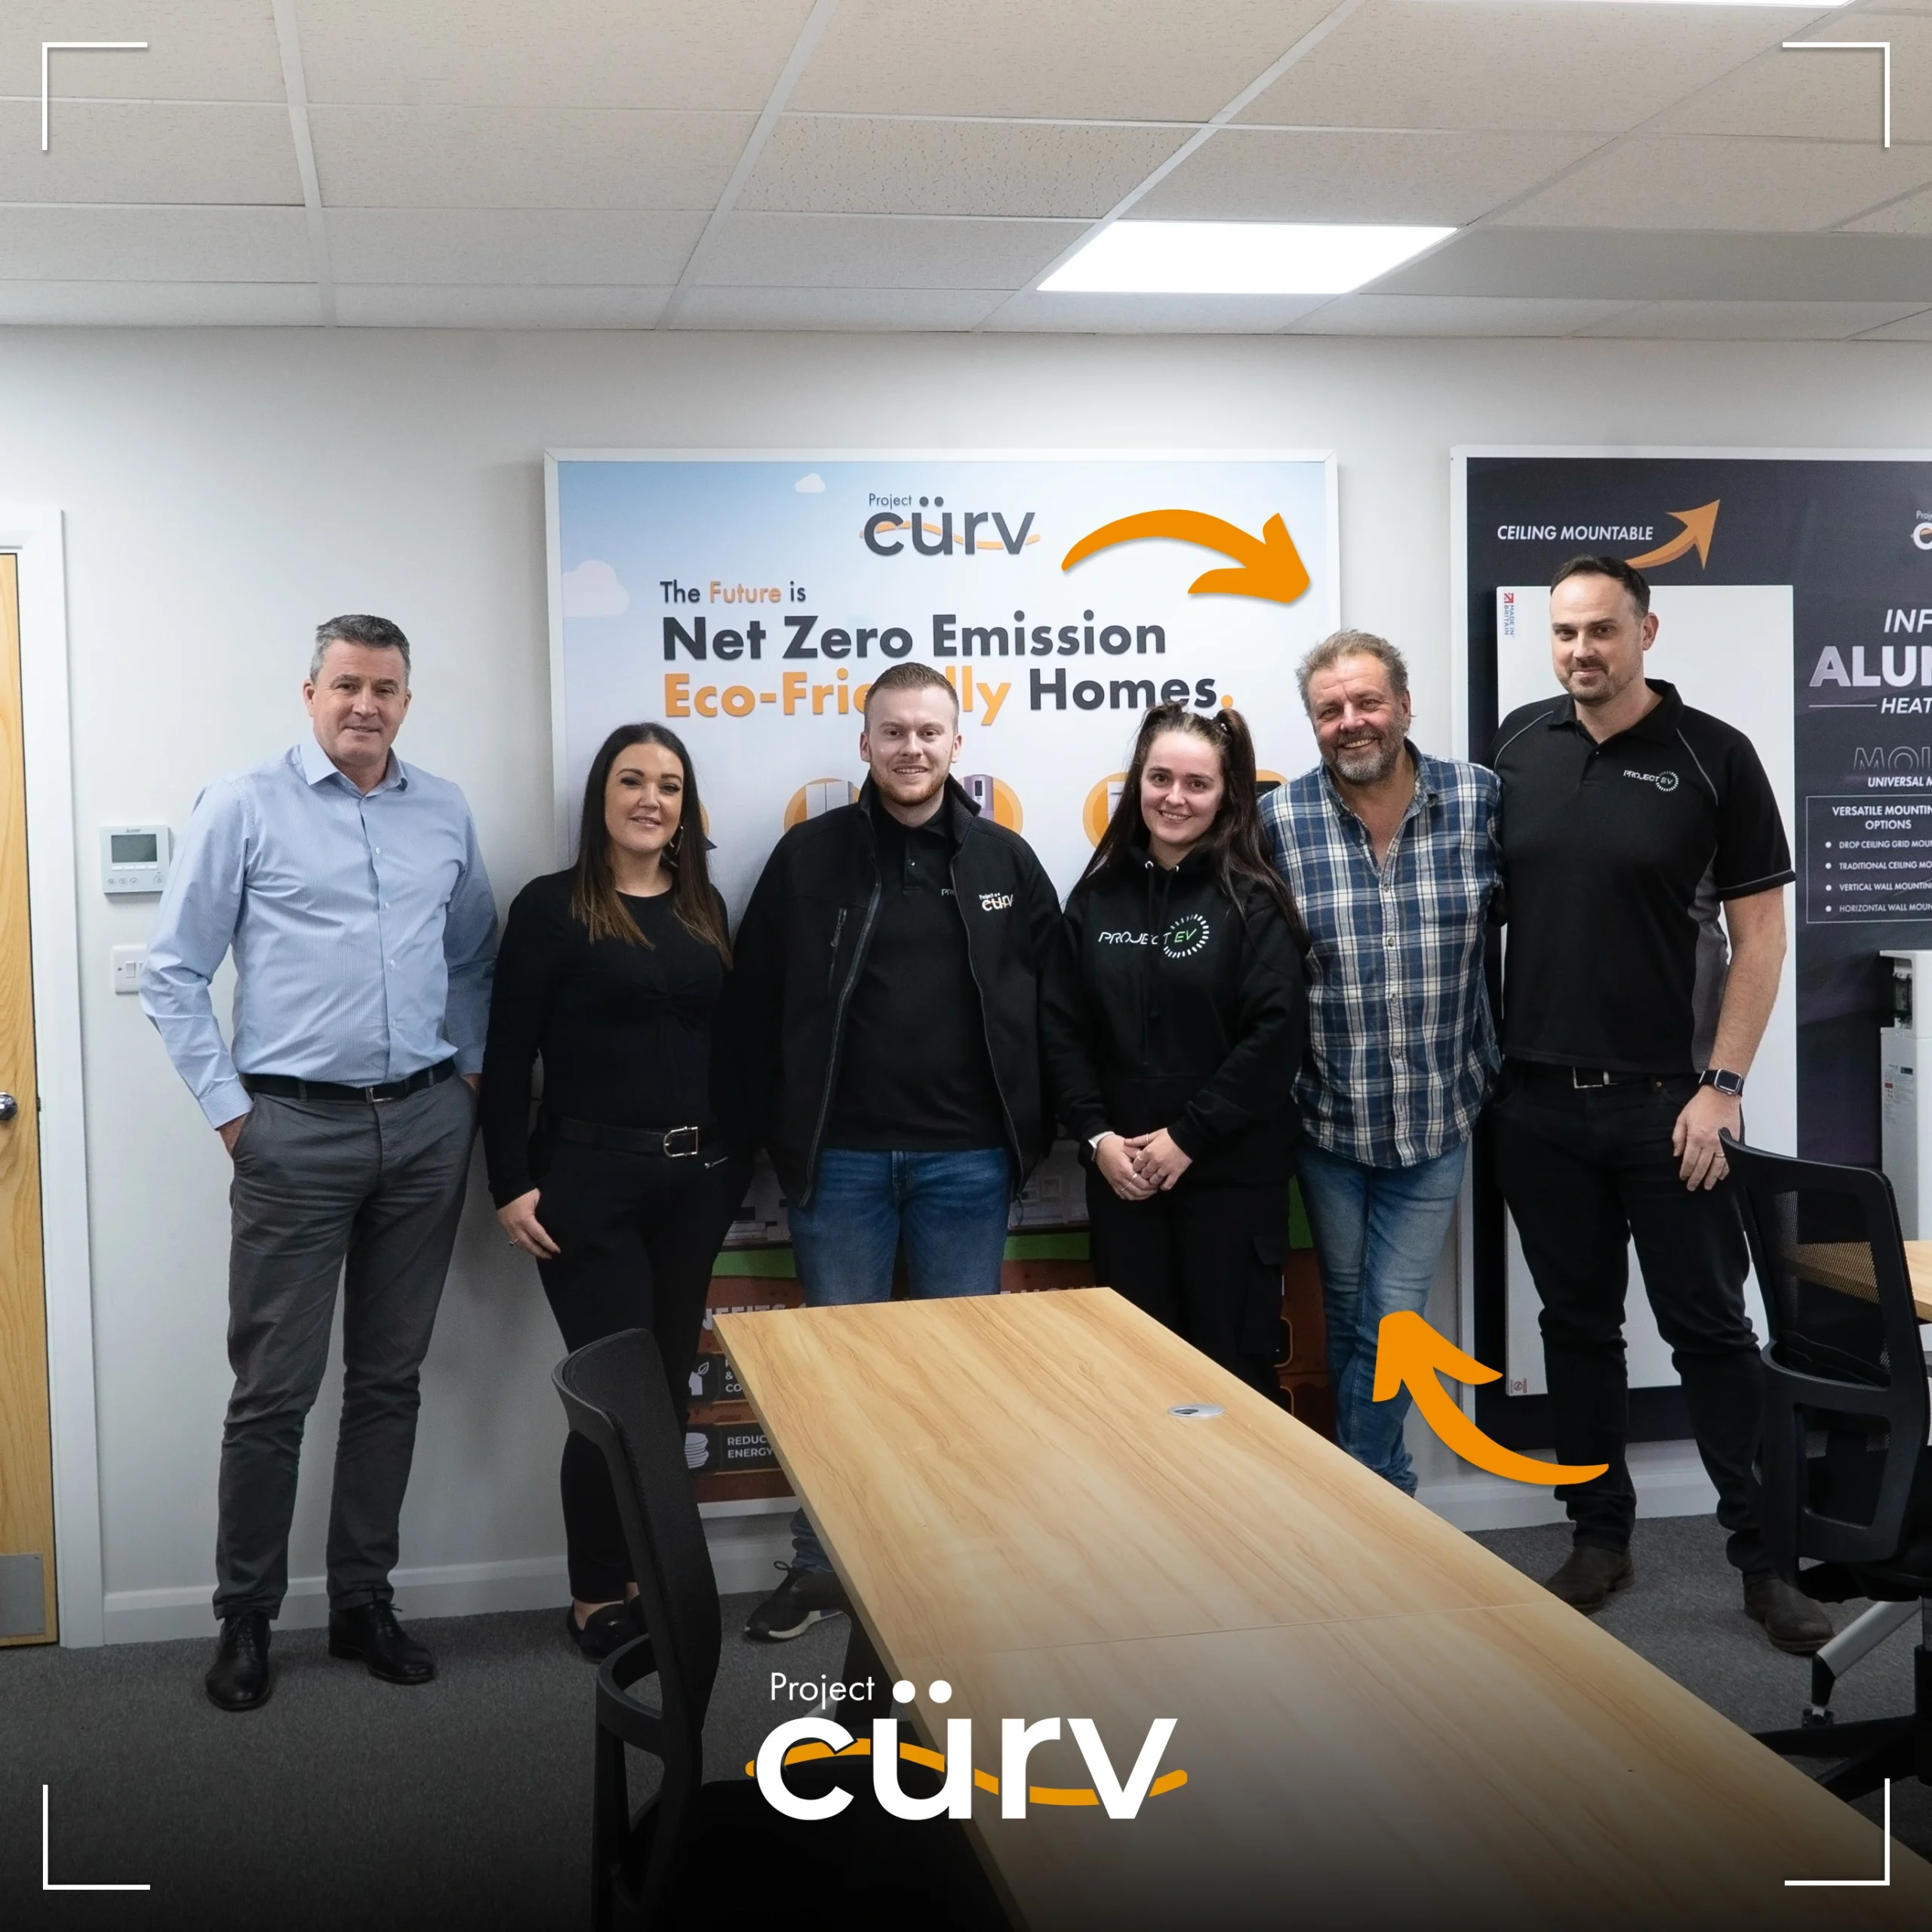 Photo with Martin roberts and CURV team in front of a showroom board